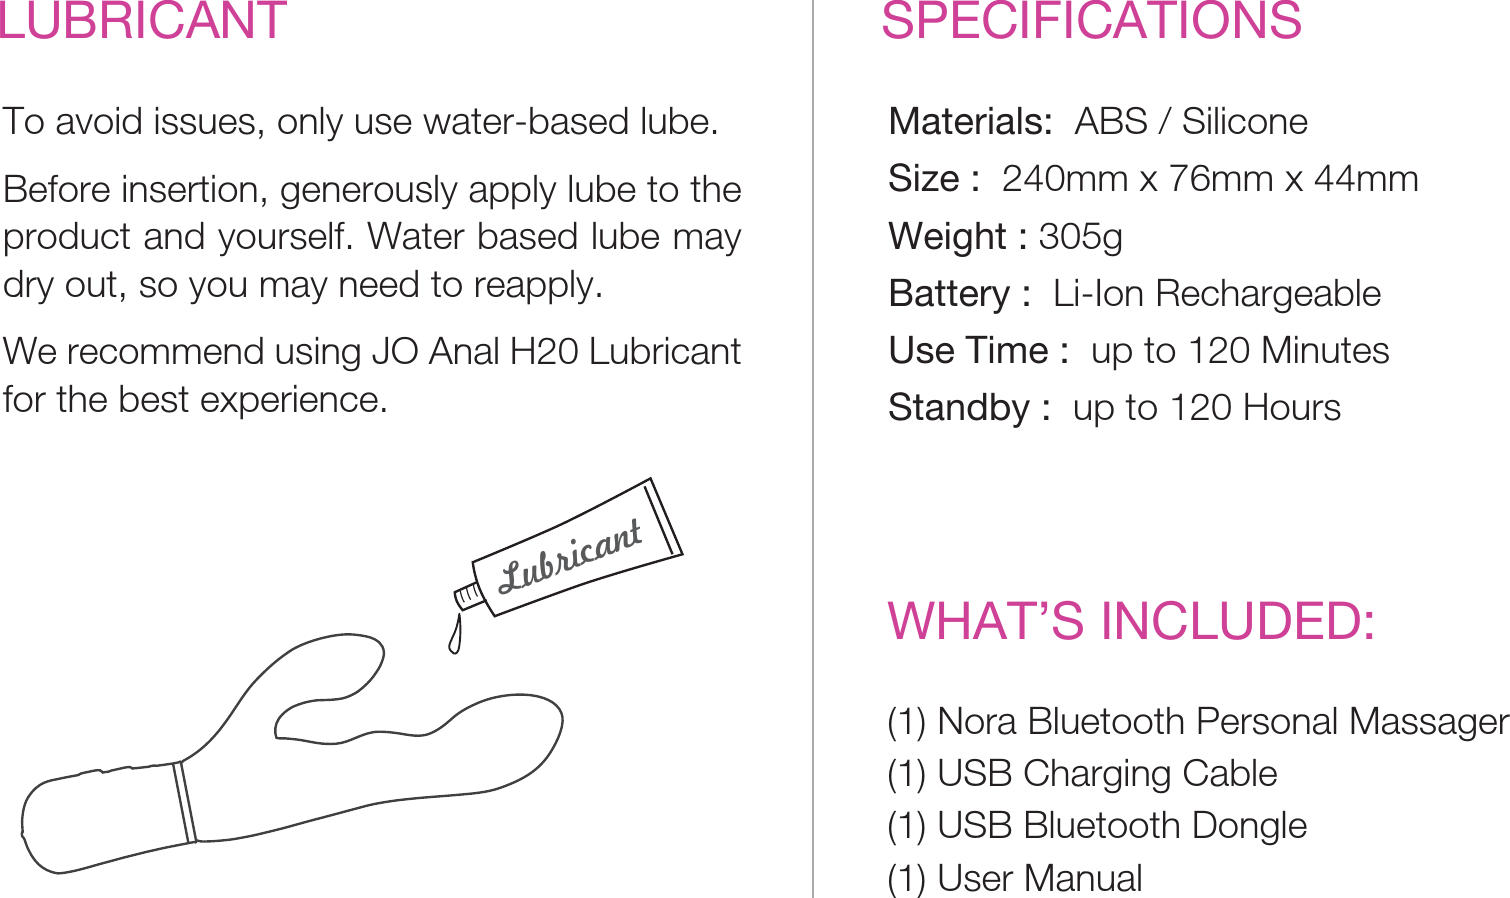 SPECIFICATIONSWHAT’S INCLUDED:Materials:  ABS / SiliconeSize :  240mm x 76mm x 44mmWeight : 305gBattery :  Li-Ion RechargeableUse Time :  up to 120 MinutesStandby :  up to 120 HoursLUBRICANTTo avoid issues, only use water-based lube. Before insertion, generously apply lube to the product and yourself. Water based lube may dry out, so you may need to reapply.We recommend using JO Anal H20 Lubricant for the best experience.(1) Nora Bluetooth Personal Massager(1) USB Charging Cable(1) USB Bluetooth Dongle(1) User Manual Lubricant